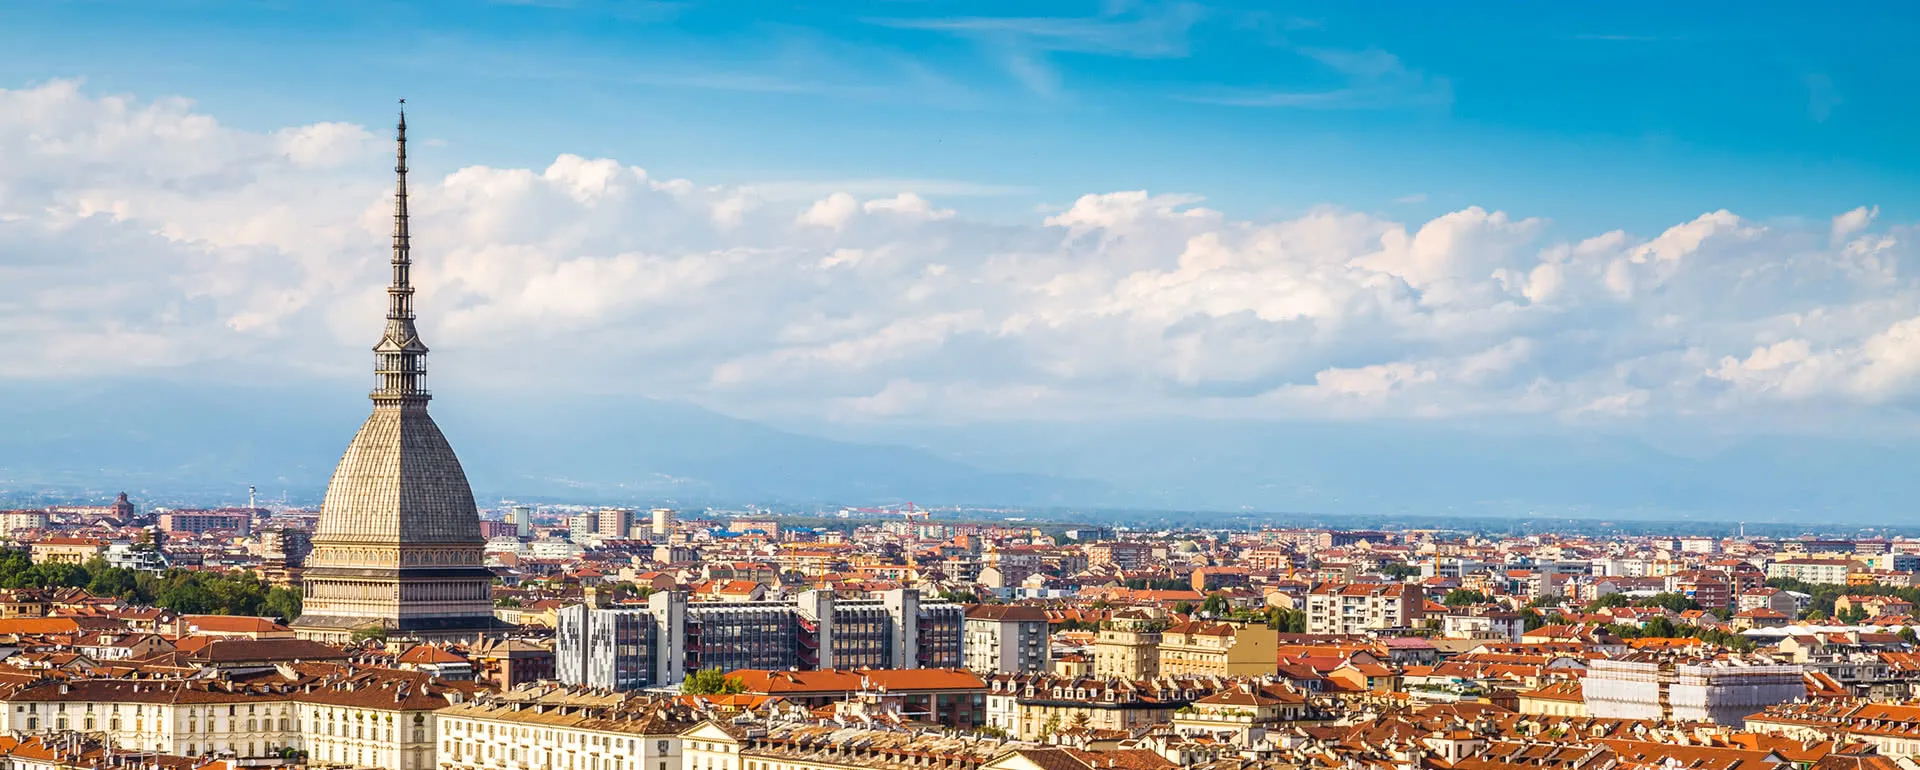 Turin - the destination for group trips